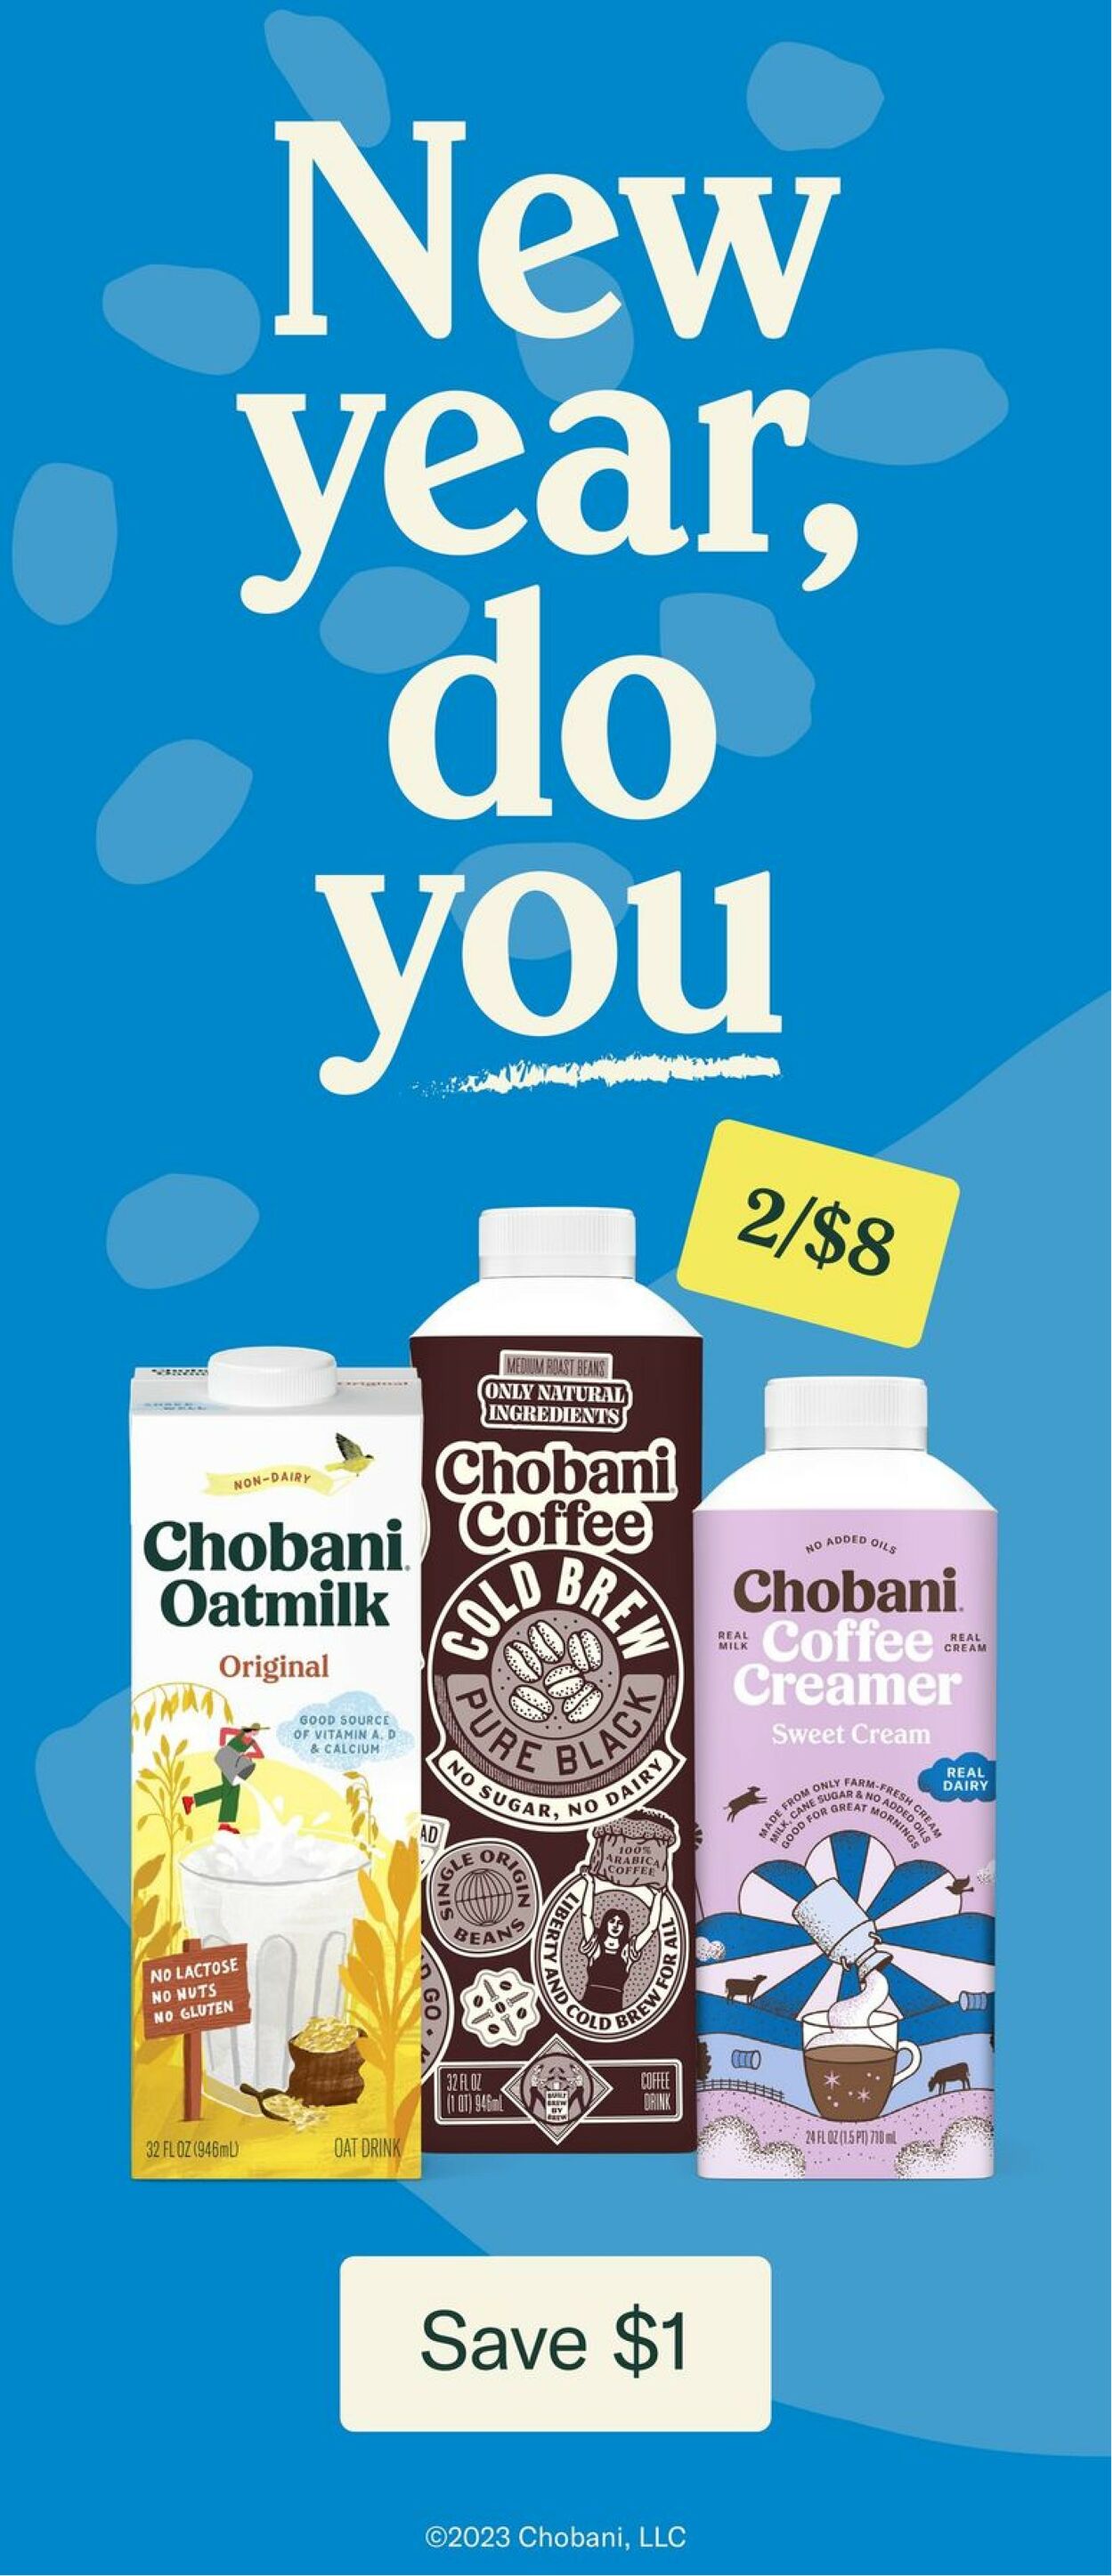 Stop and Shop Ad from 01/20/2023